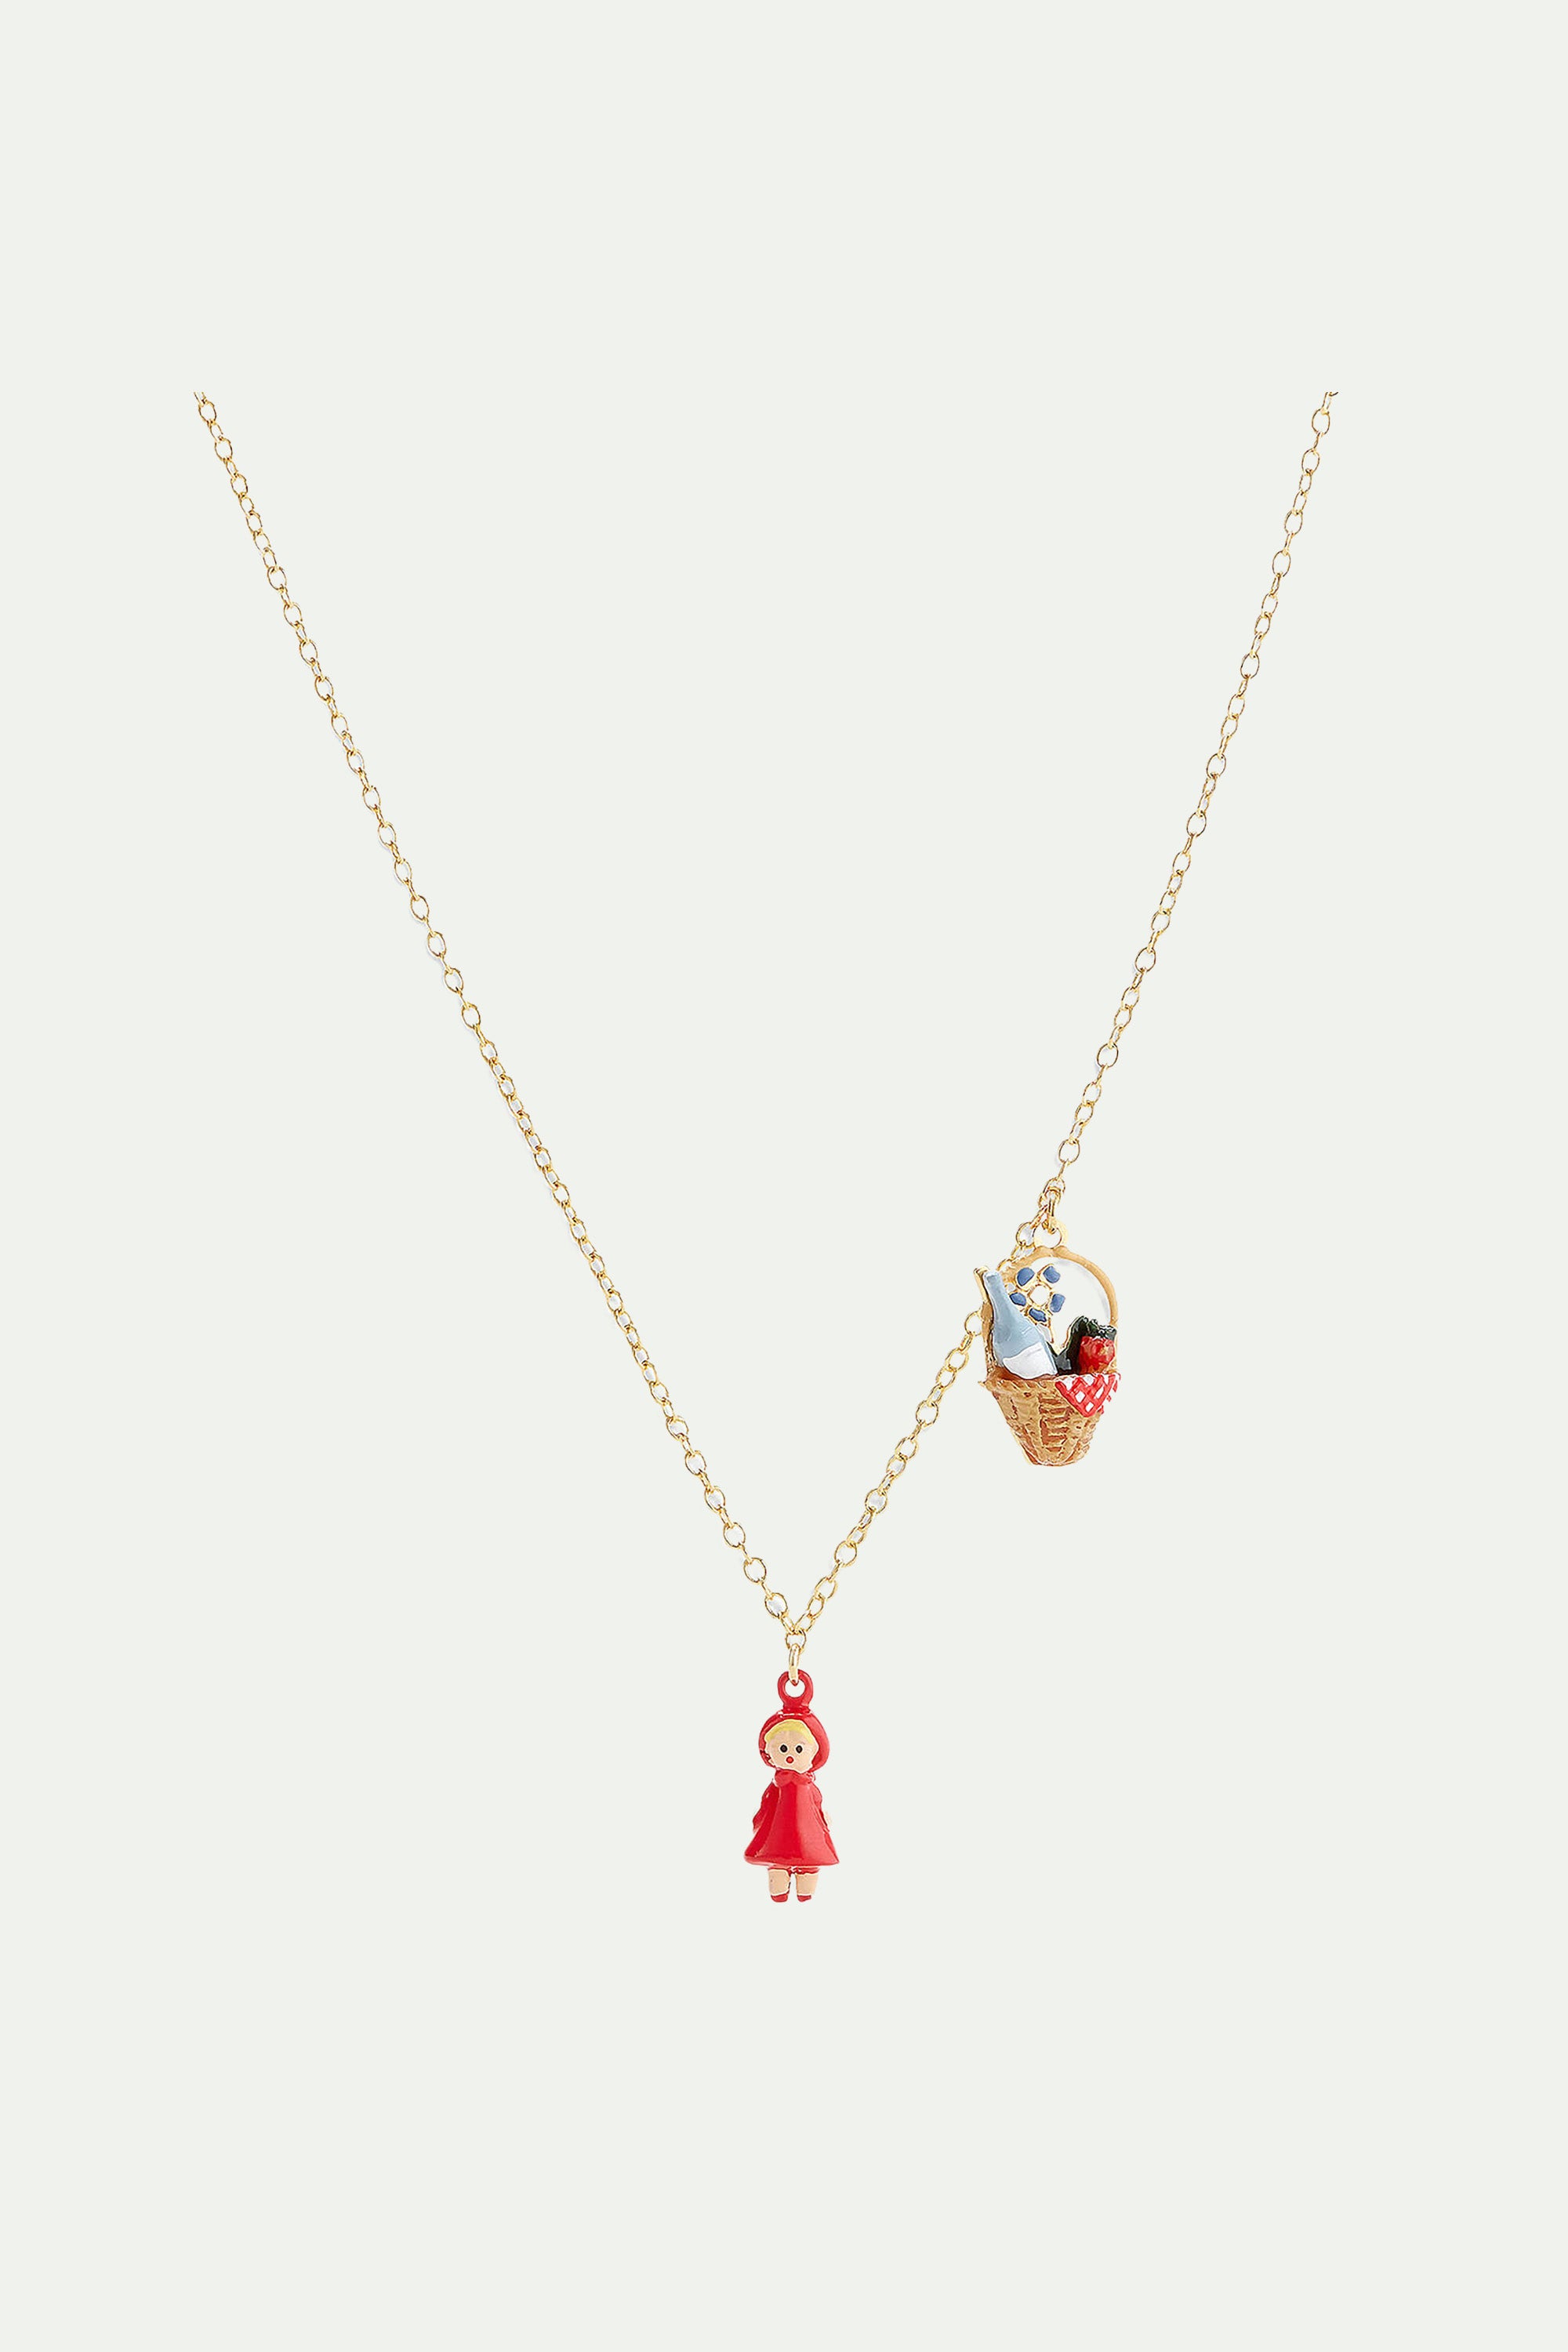 Basket and Little Red Riding Hood pendant necklace